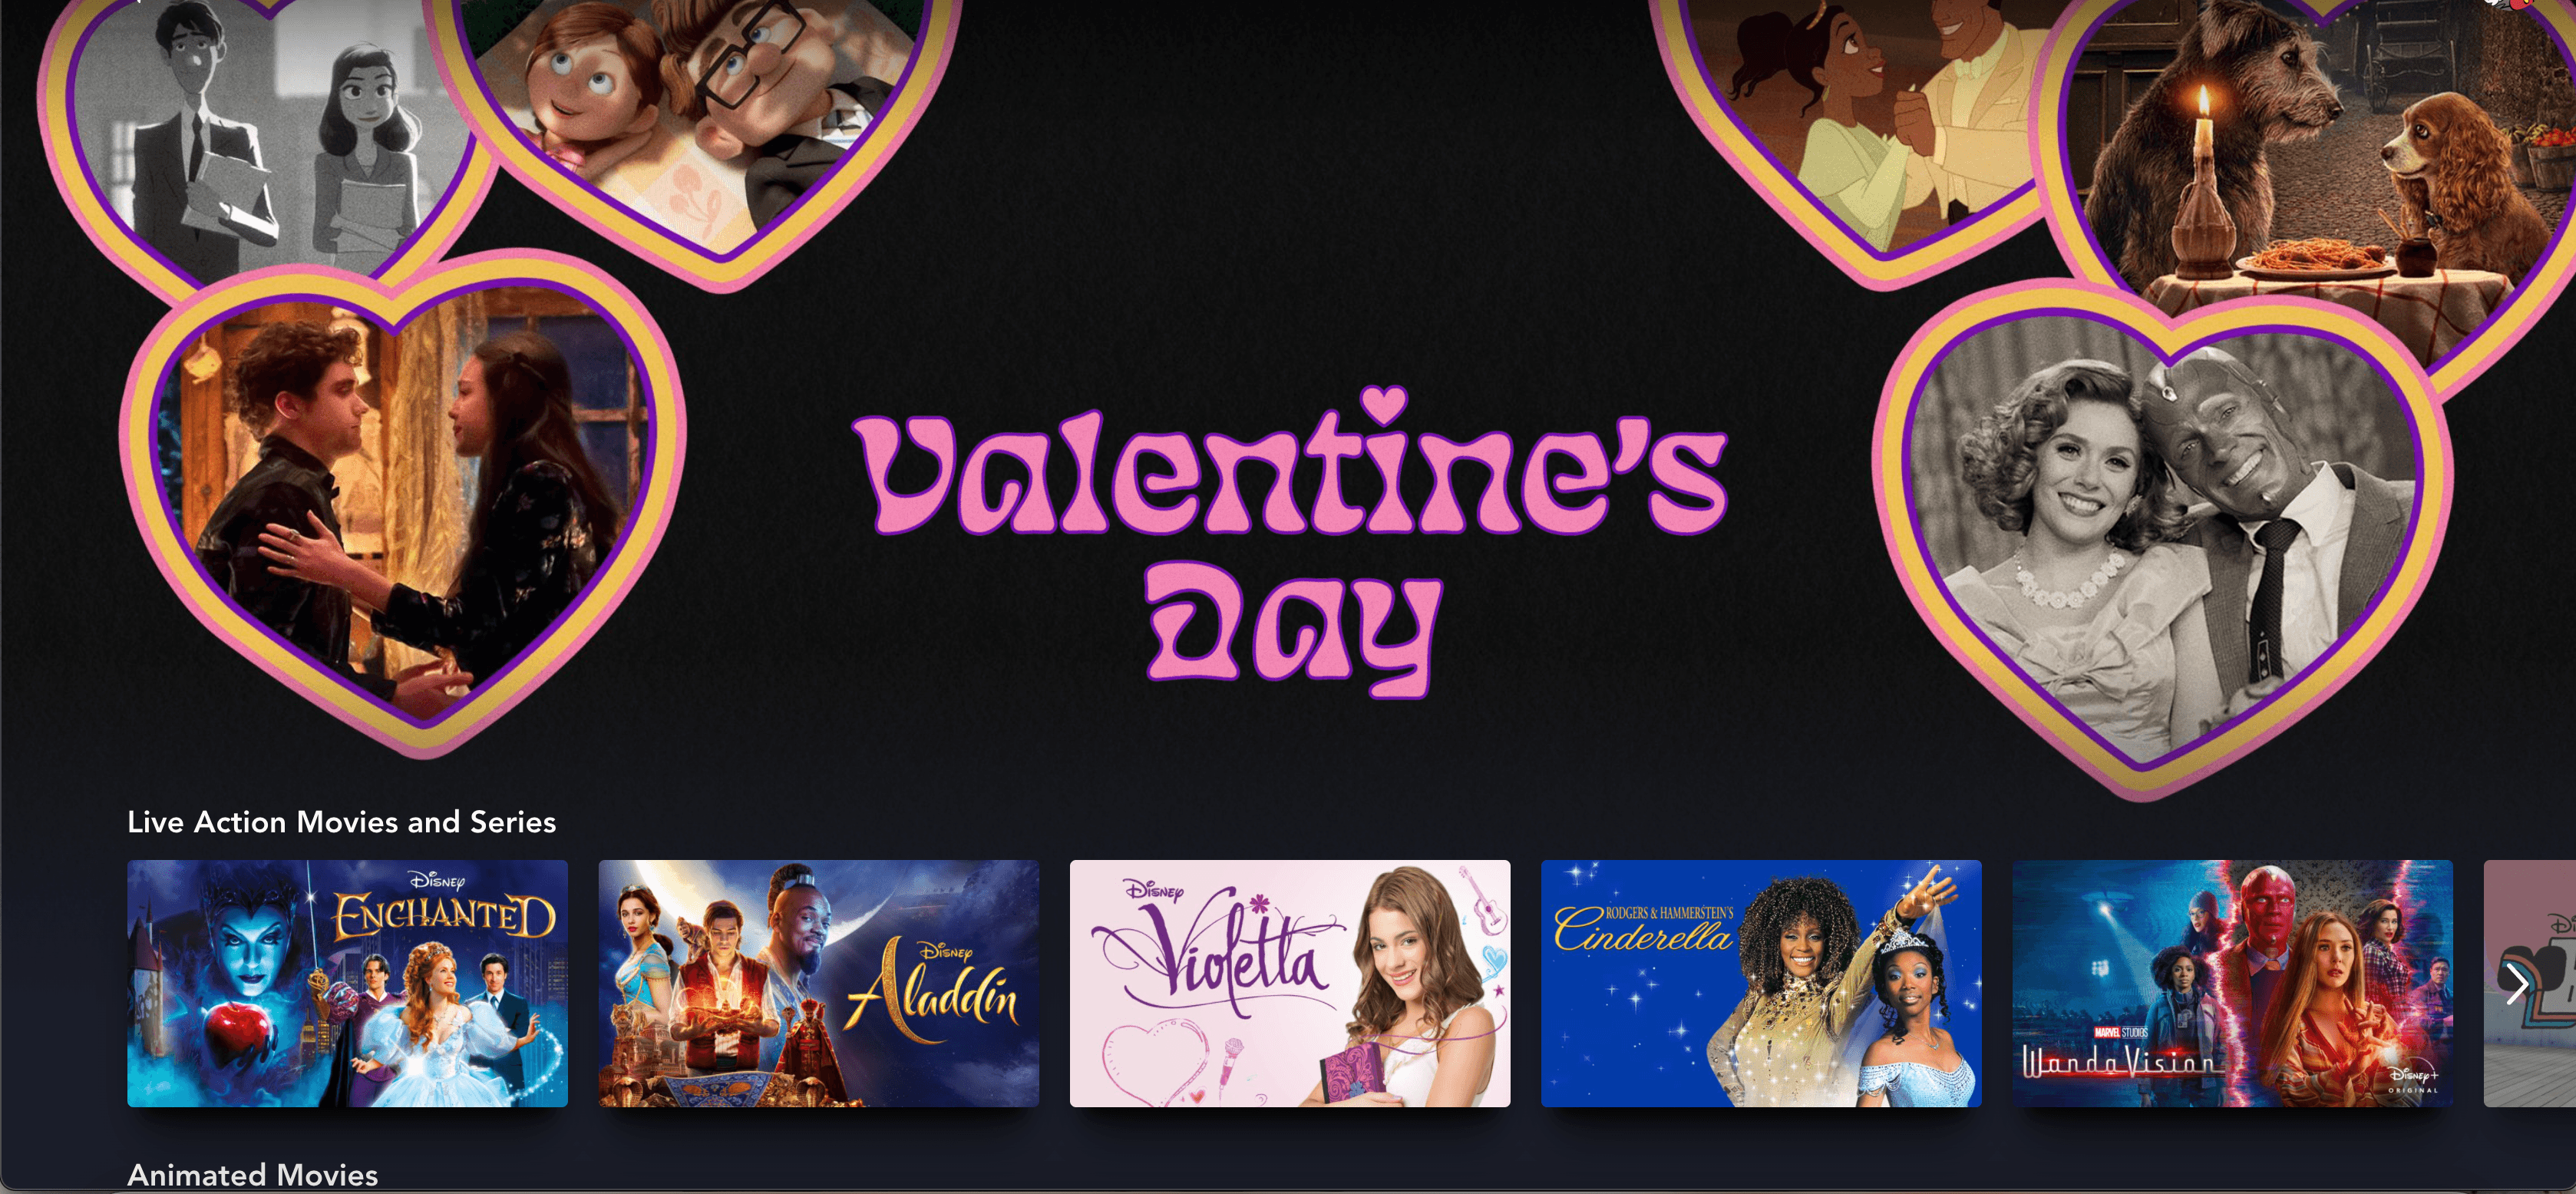 Disney+ Adds a Special ‘Valentine’s Day’ Collection for February